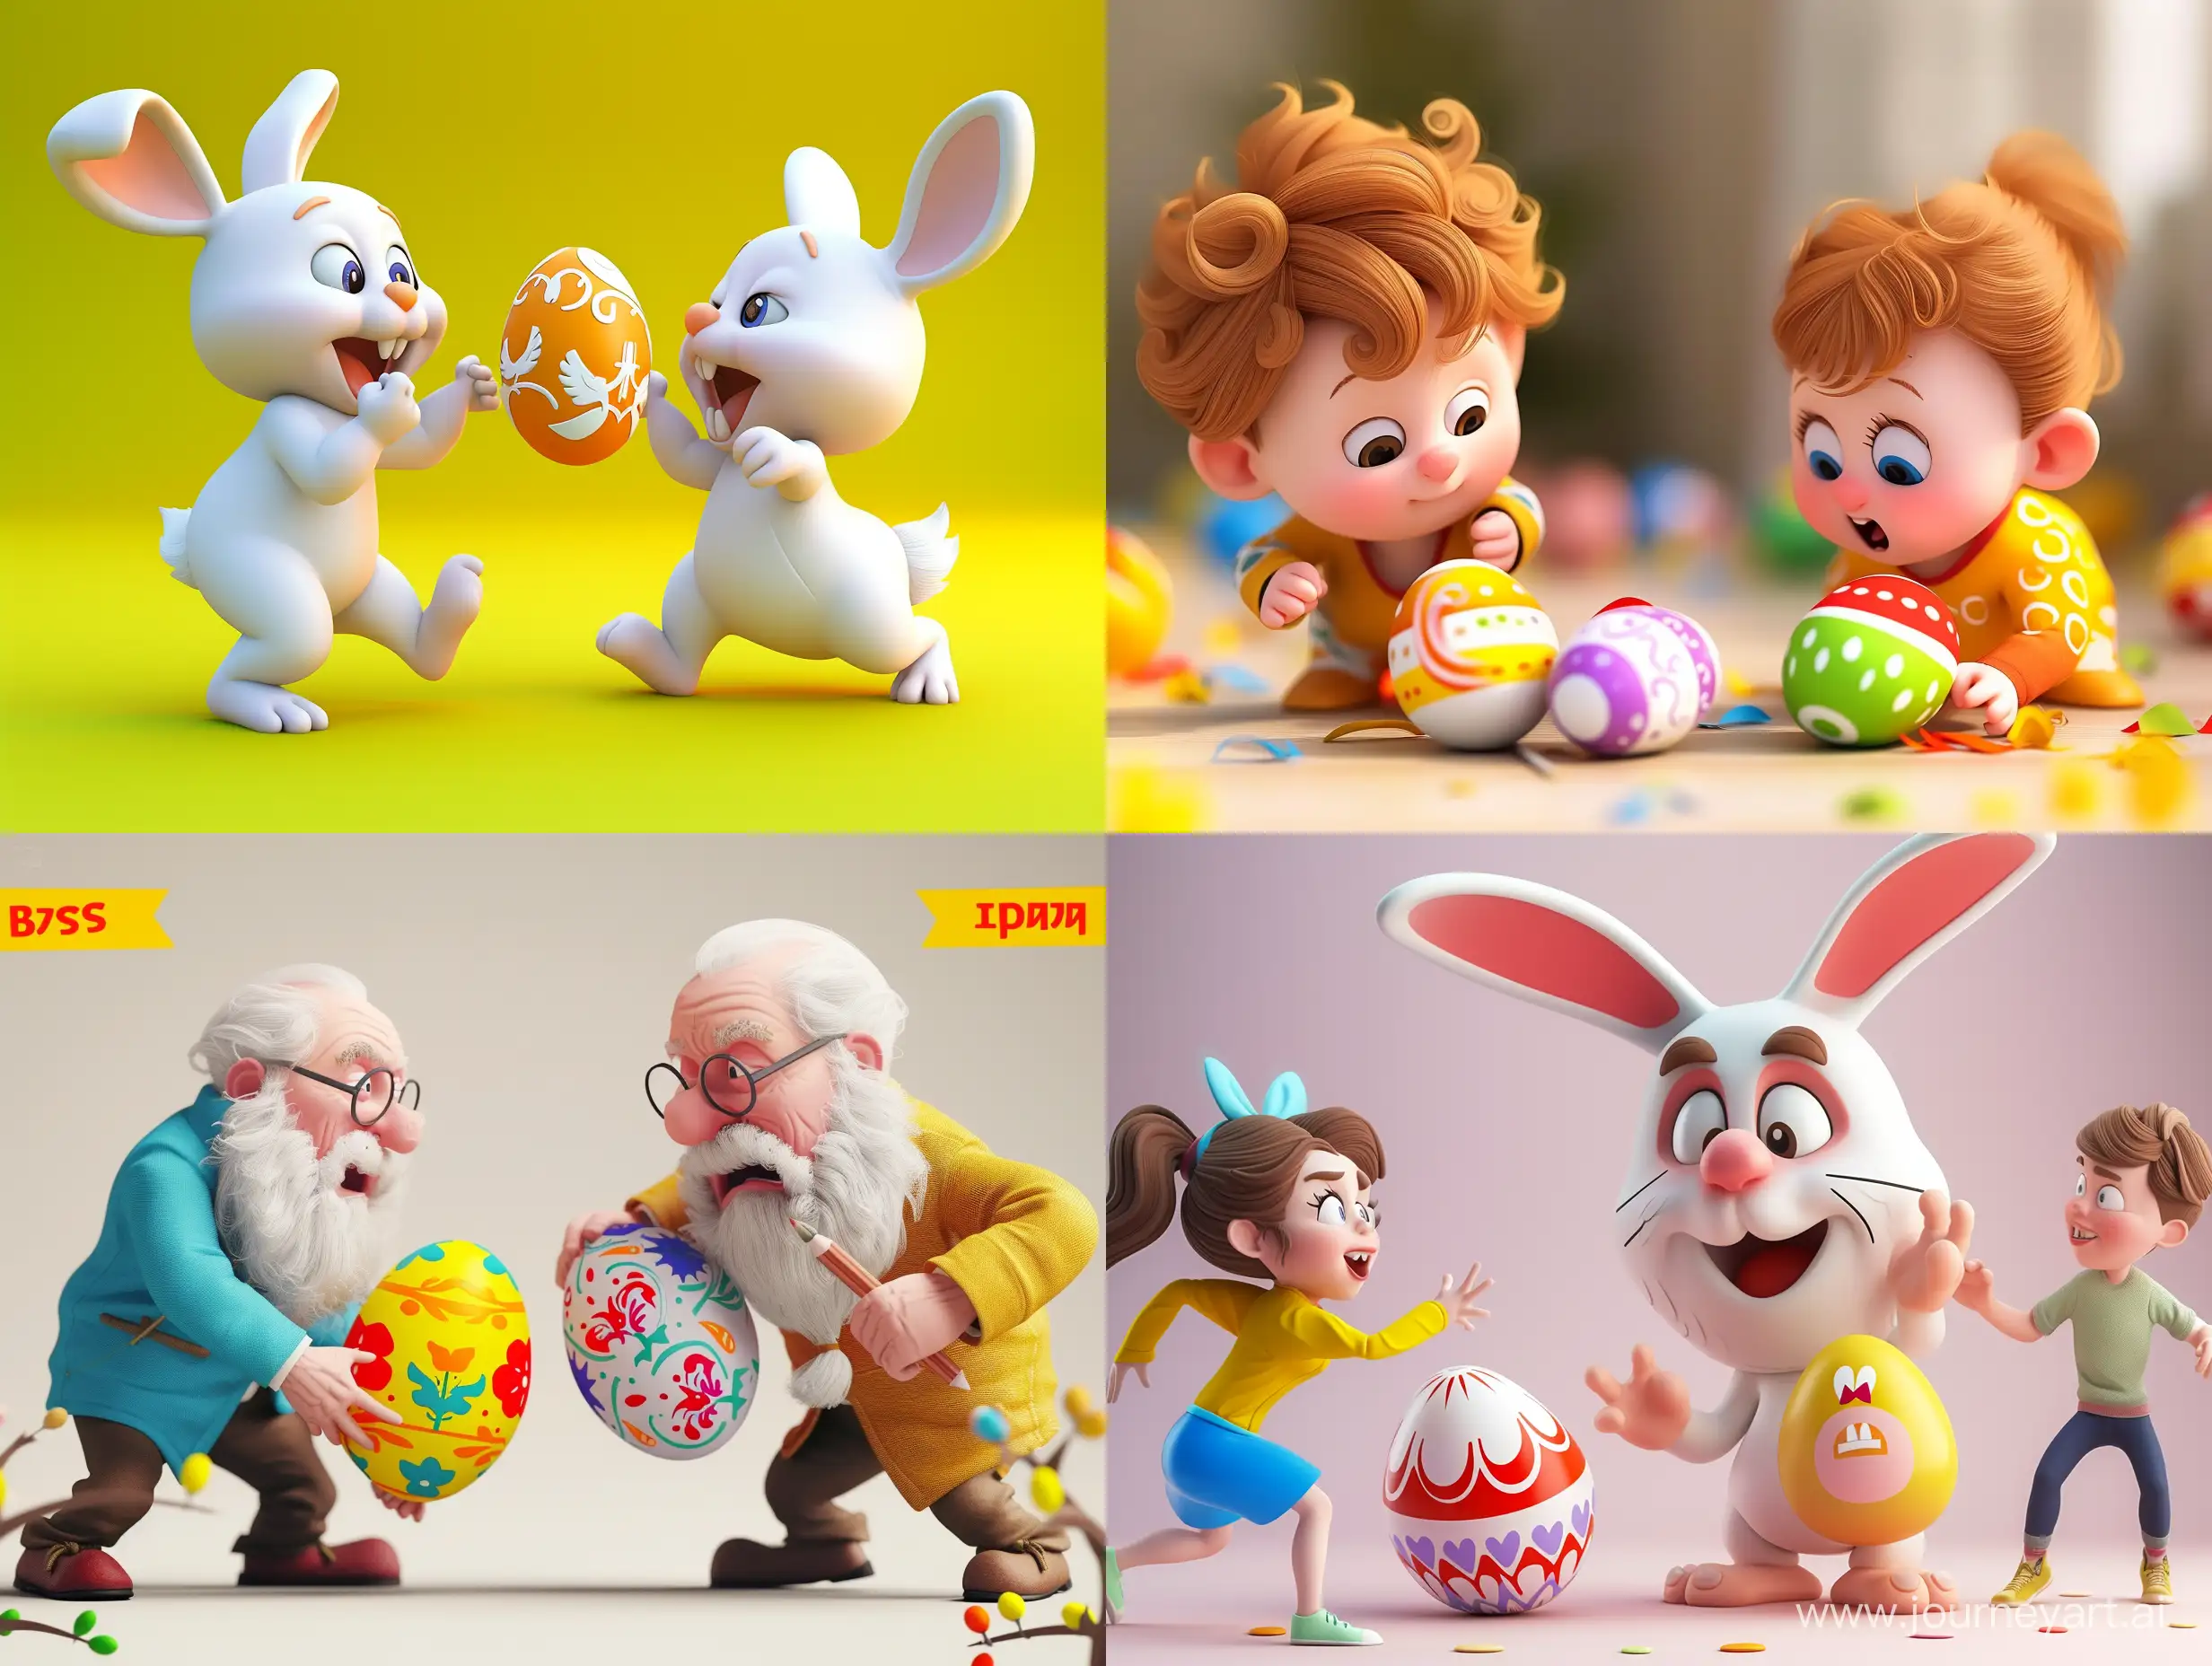 Easter-Egg-Snatching-in-Vibrant-3D-Cartoon-Style